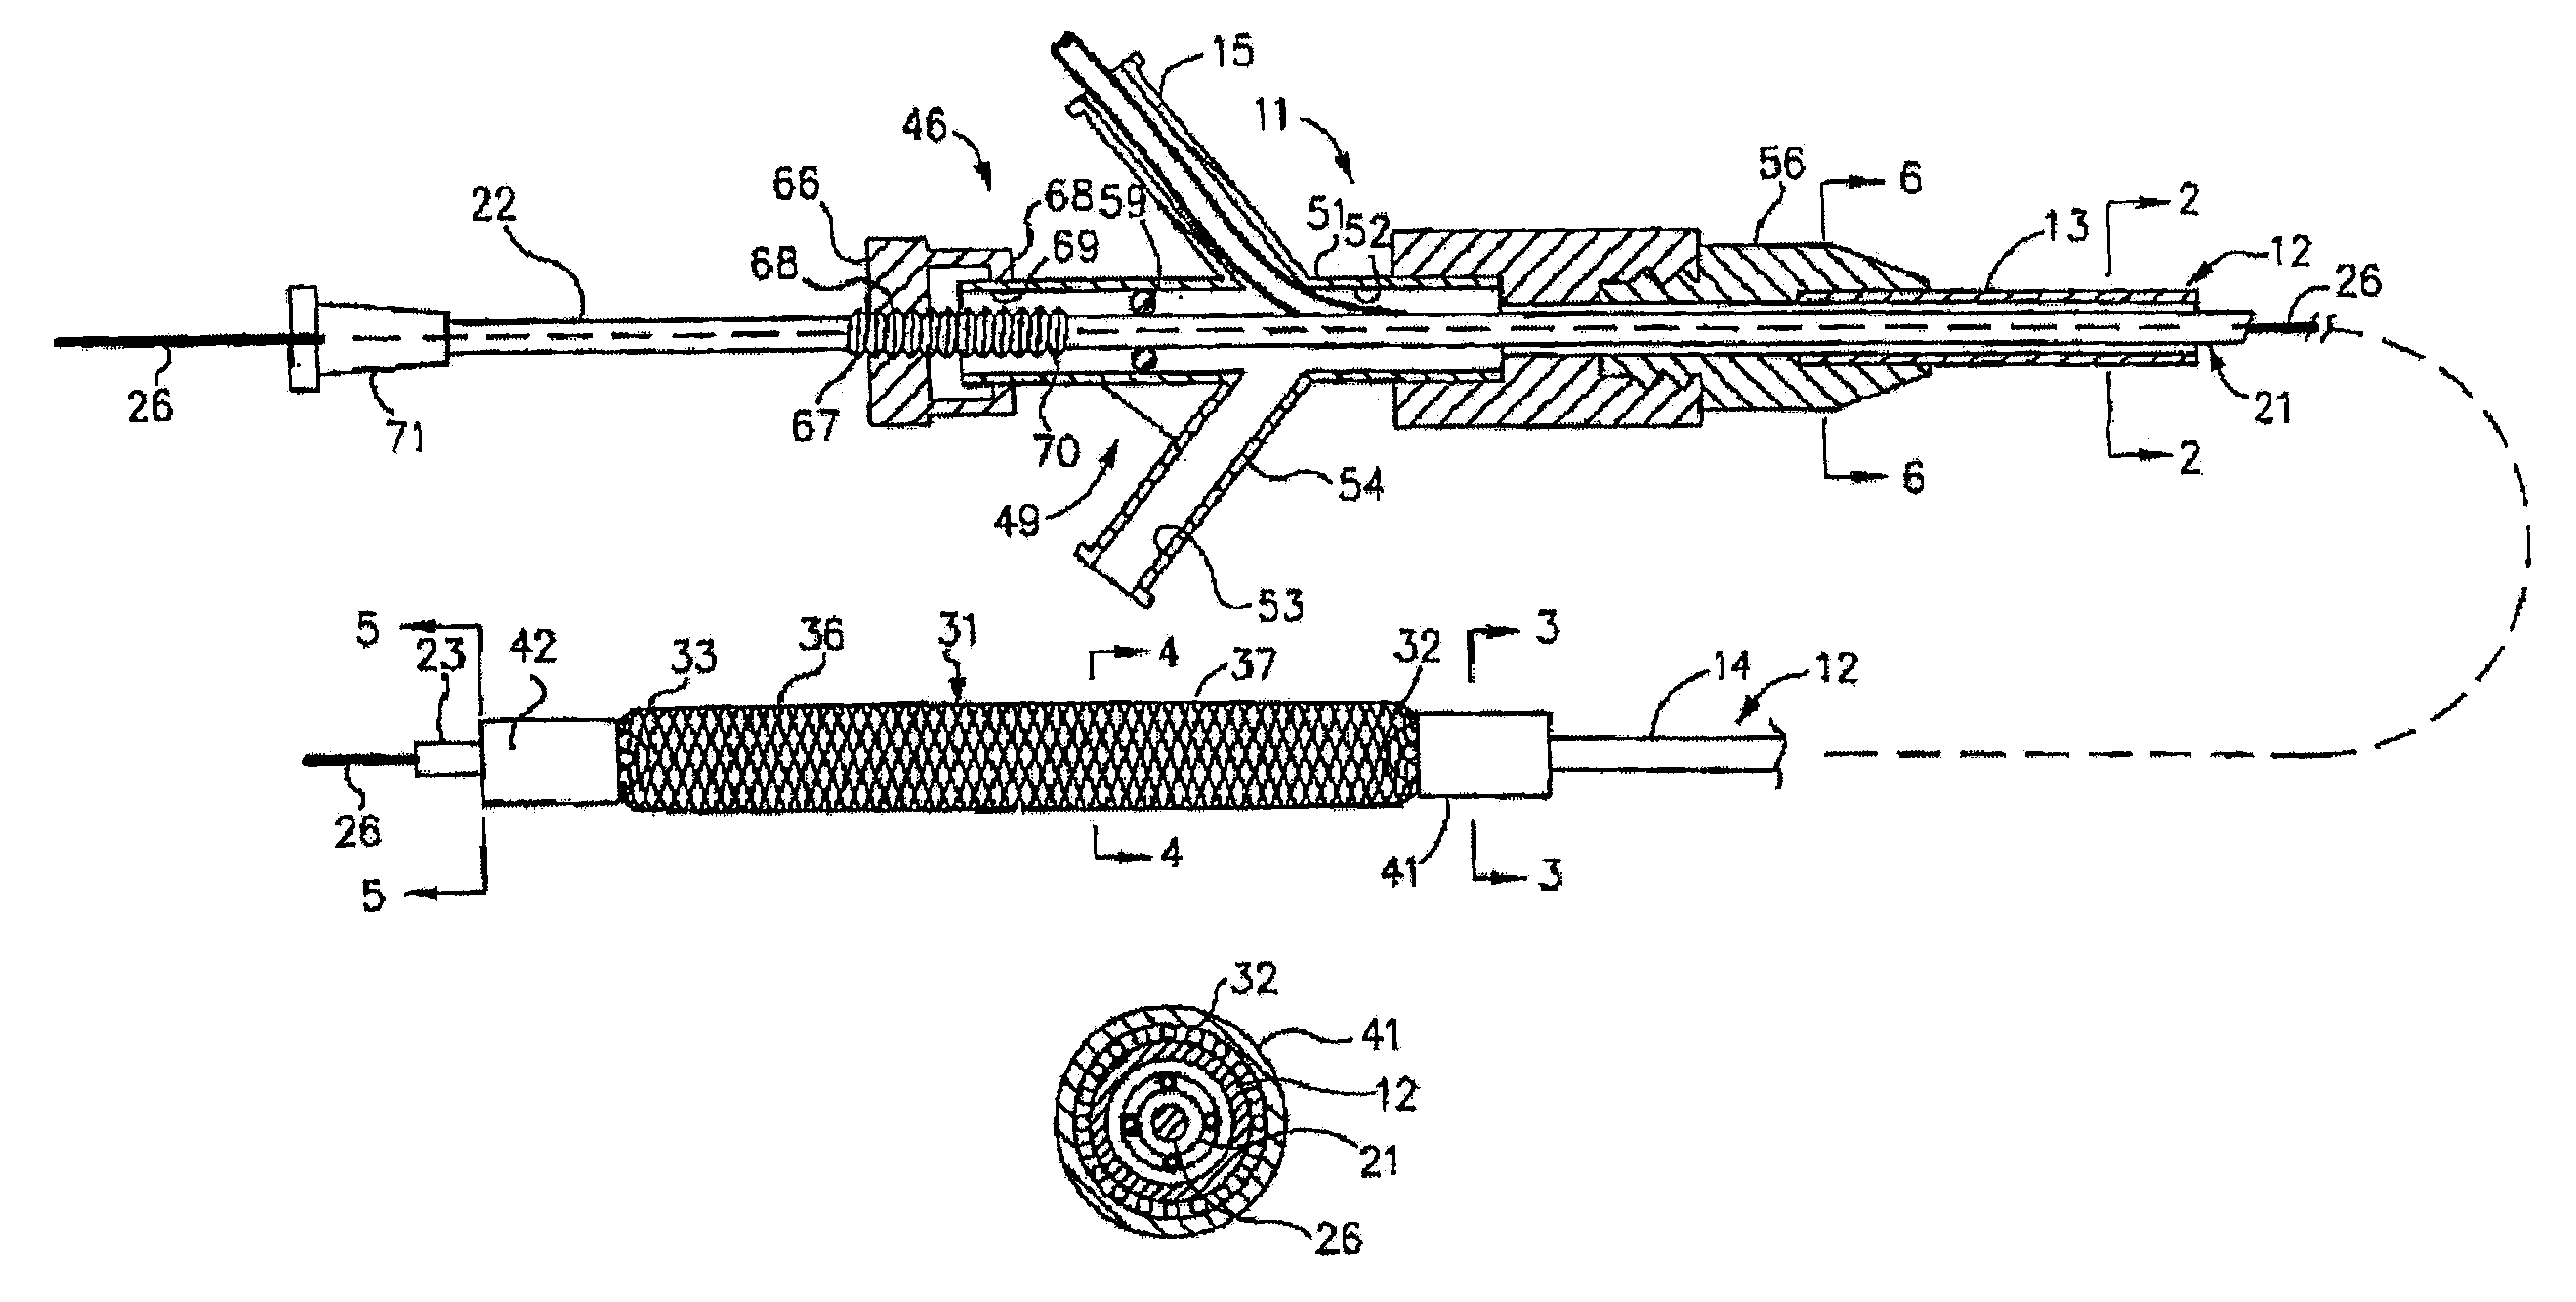 Polymer coated device for electrically medicated drug delivery